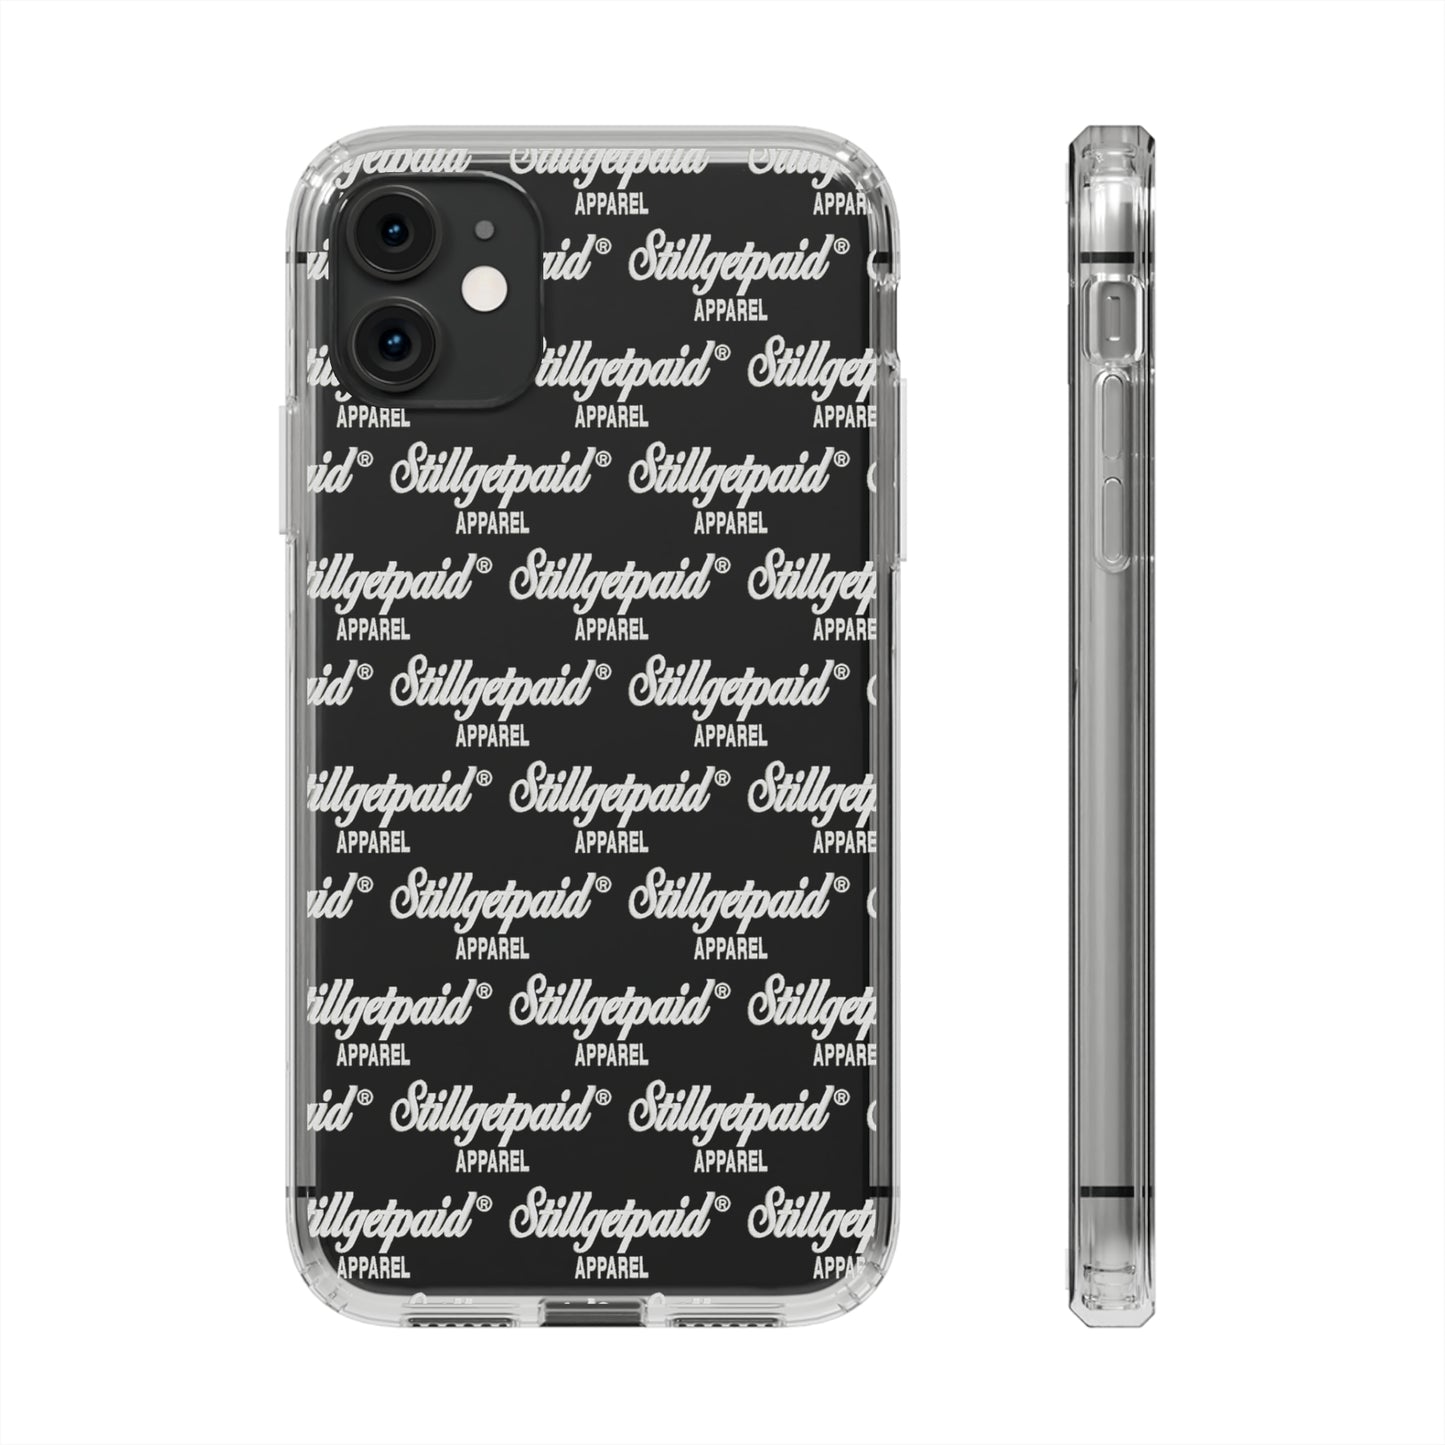 STILLGETPAID APPAREL PHONE Clear Cases